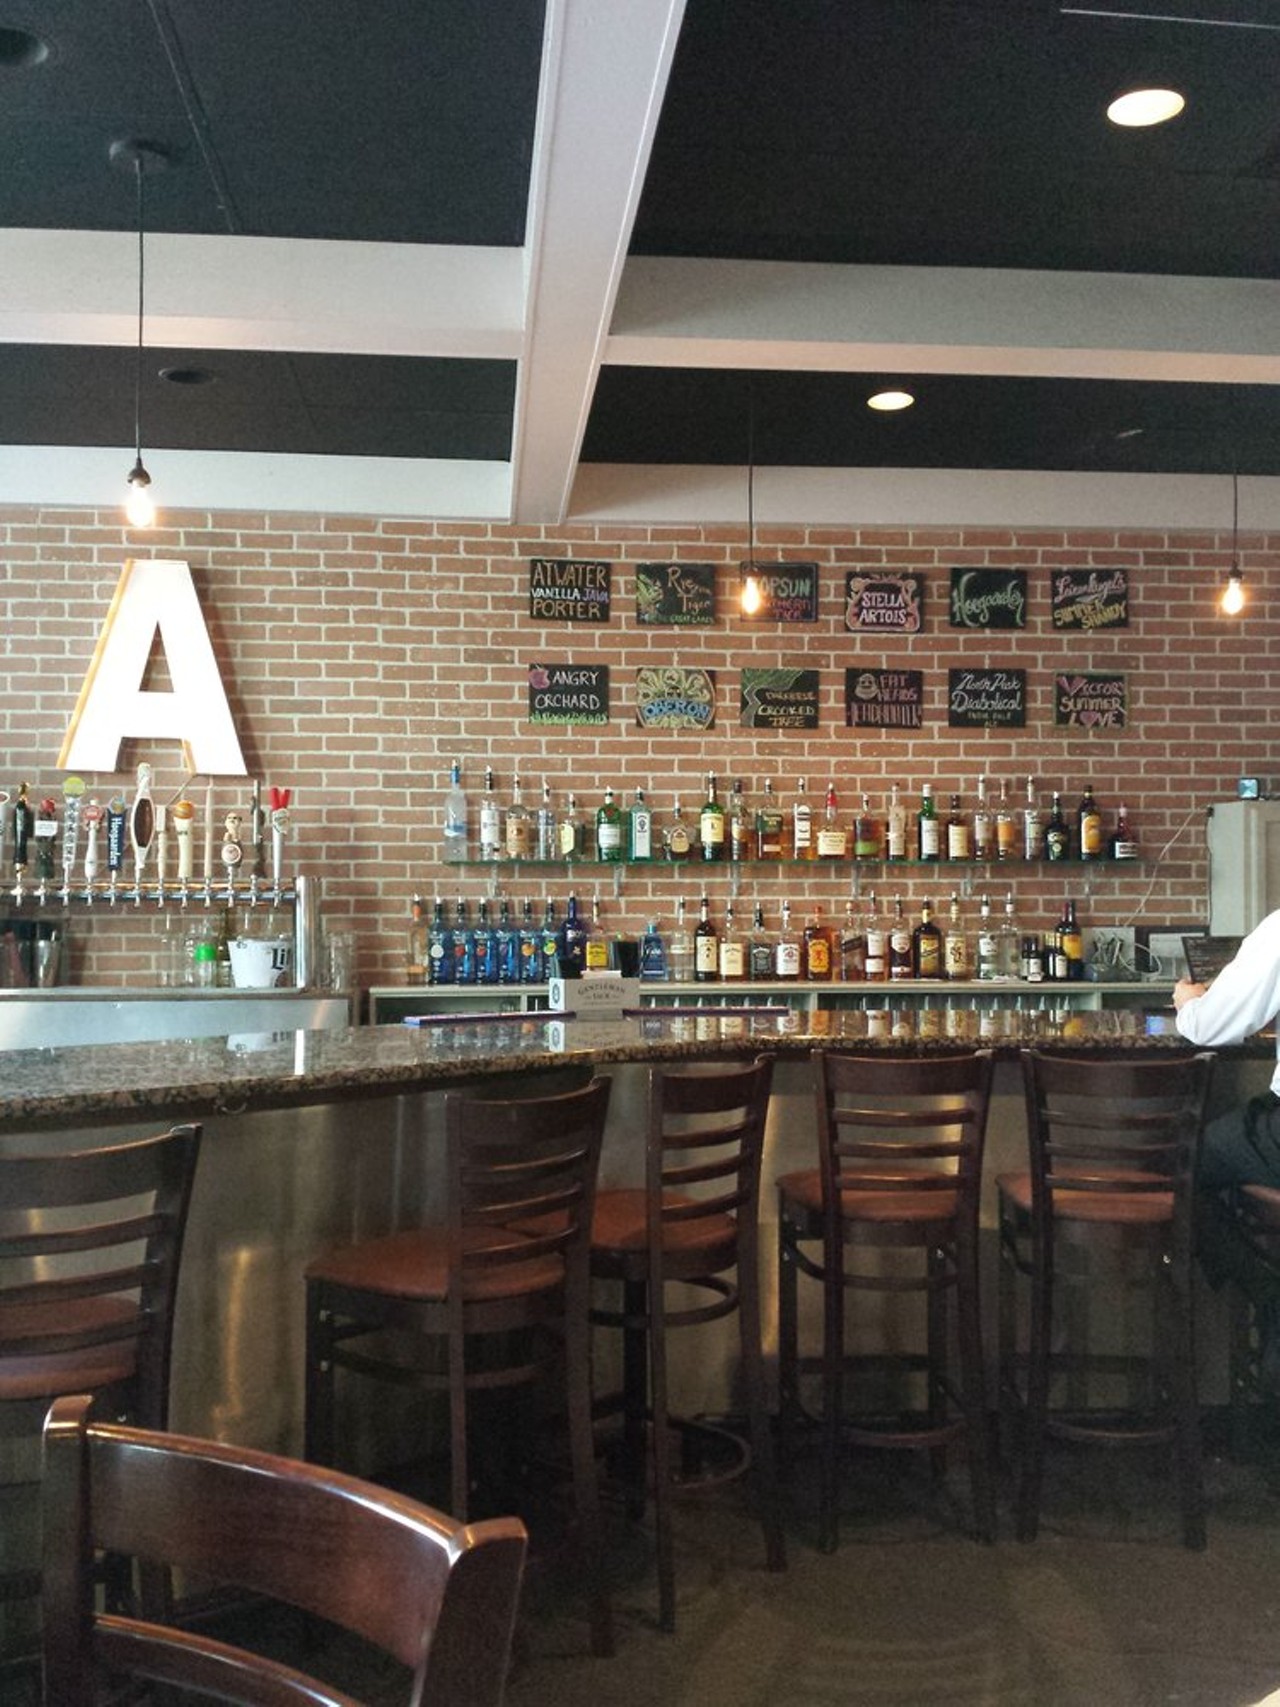 A Bar and Kitchen | 850 Euclid Ave
Ste 110
Cleveland, OH 44114